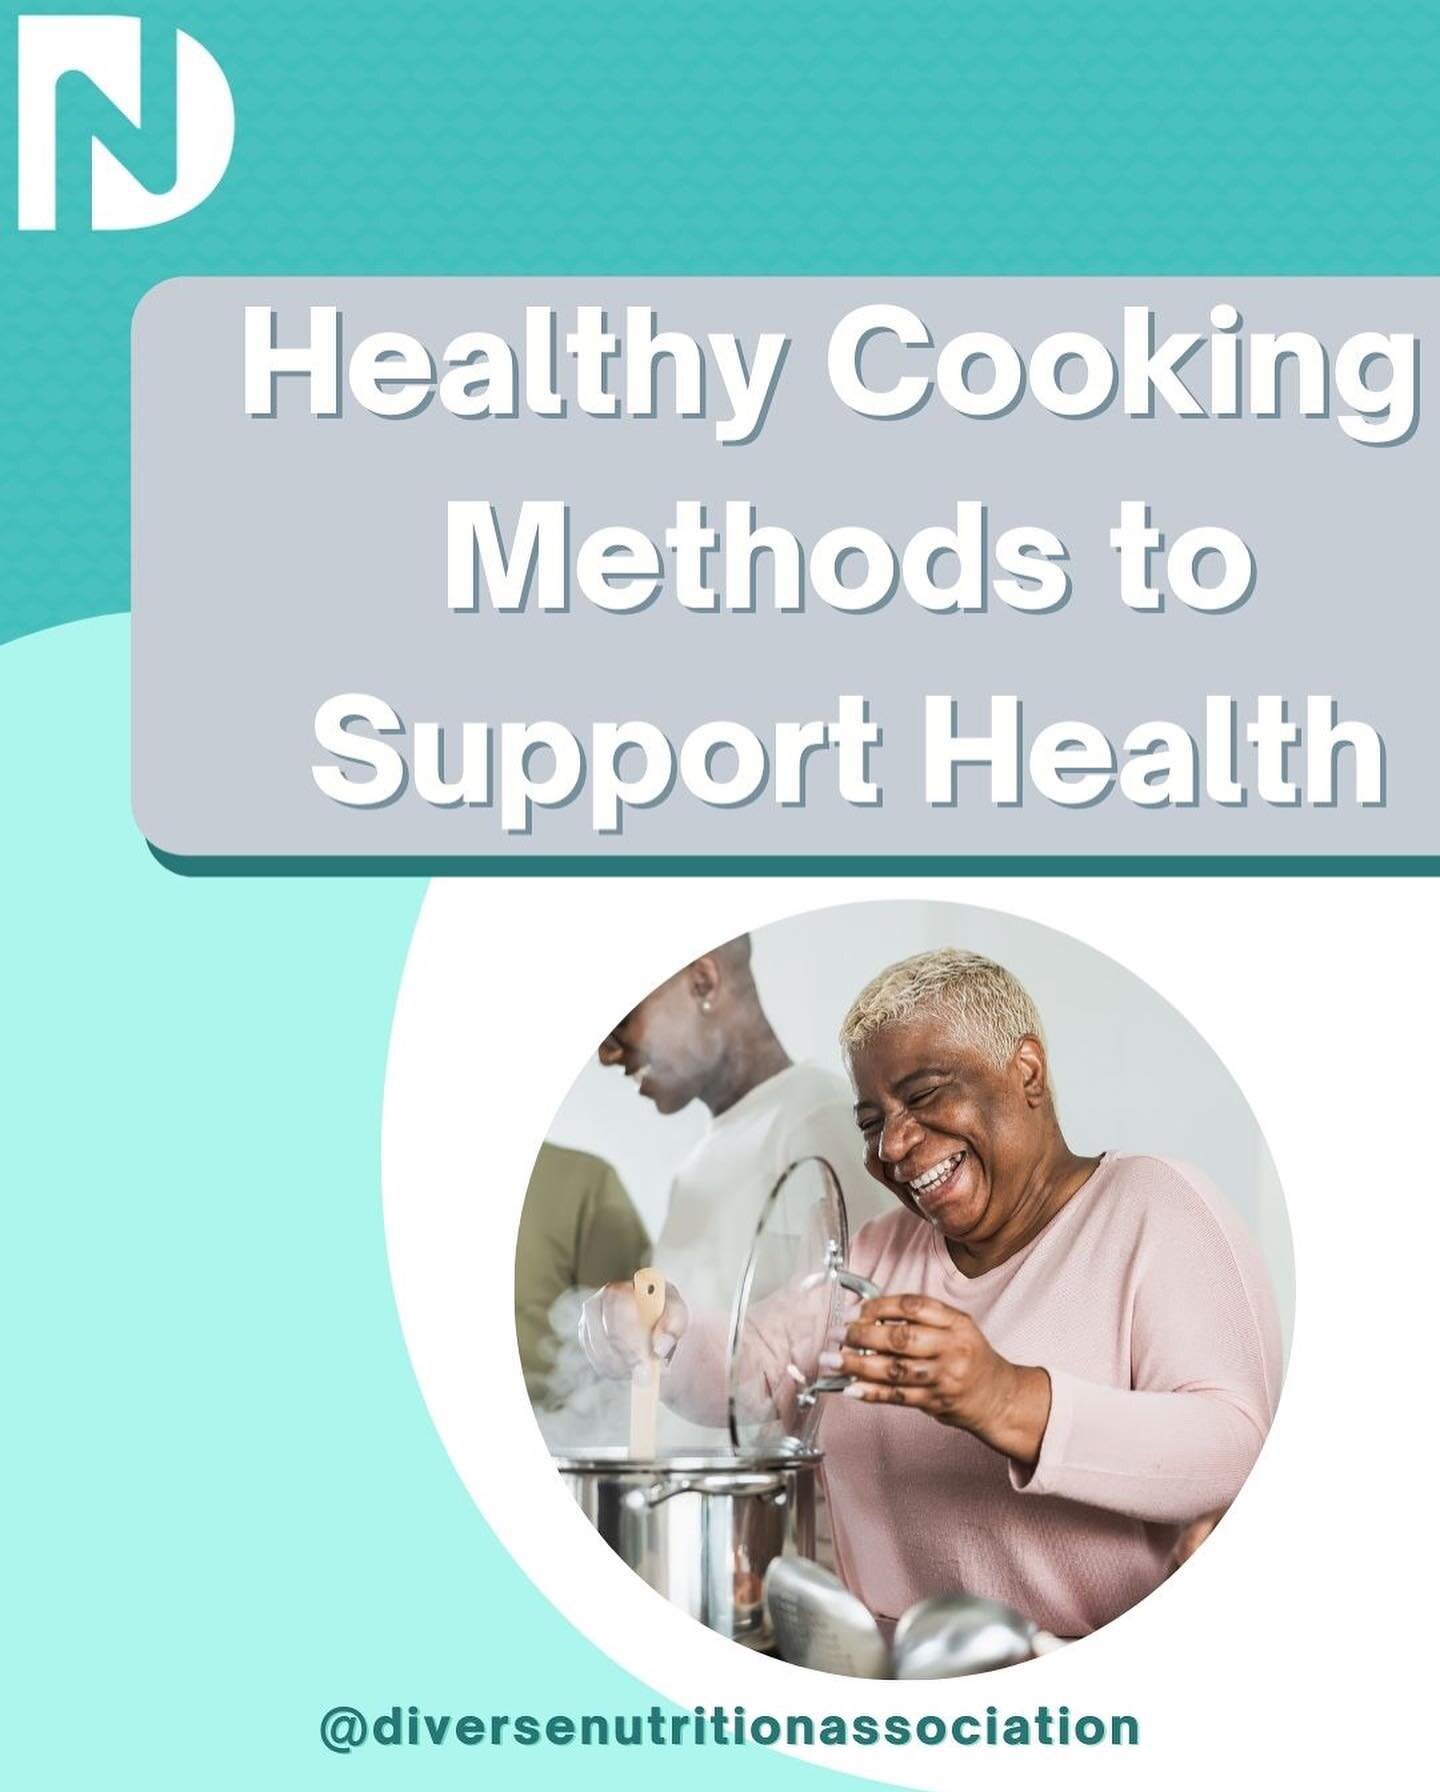 ✨Eating healthy food doesn&rsquo;t mean giving up your favourite foods. Your favourite recipes can be adapted easily to provide a healthier alternative. 

✨Choose to steam, bake, grill, bake or use less oil rather than deep frying or overcooking. 

 